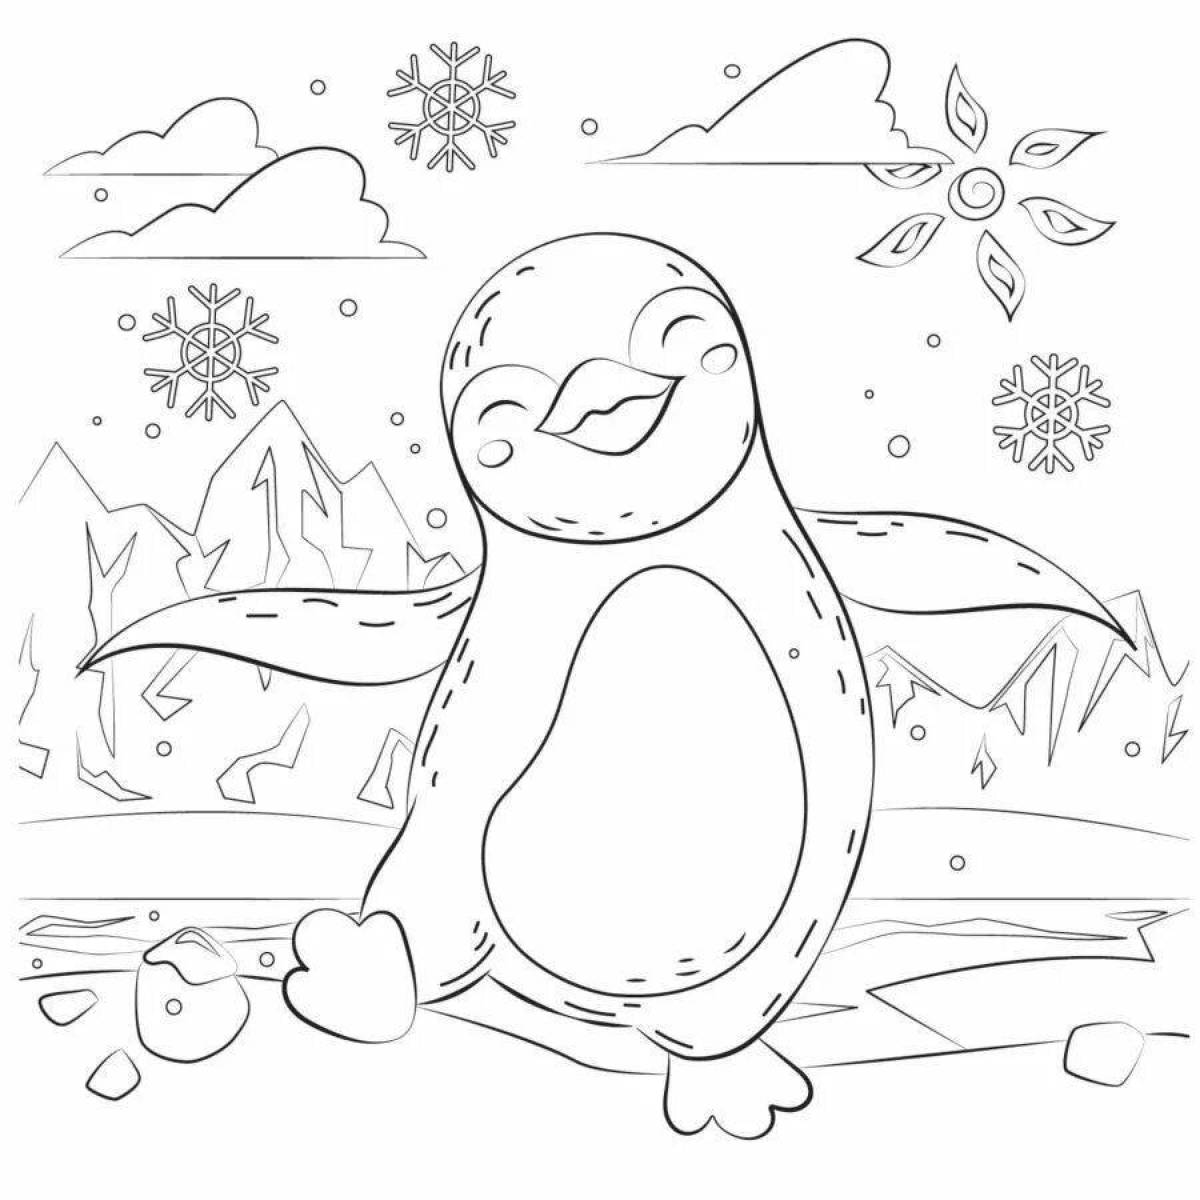 Colorful penguin coloring page